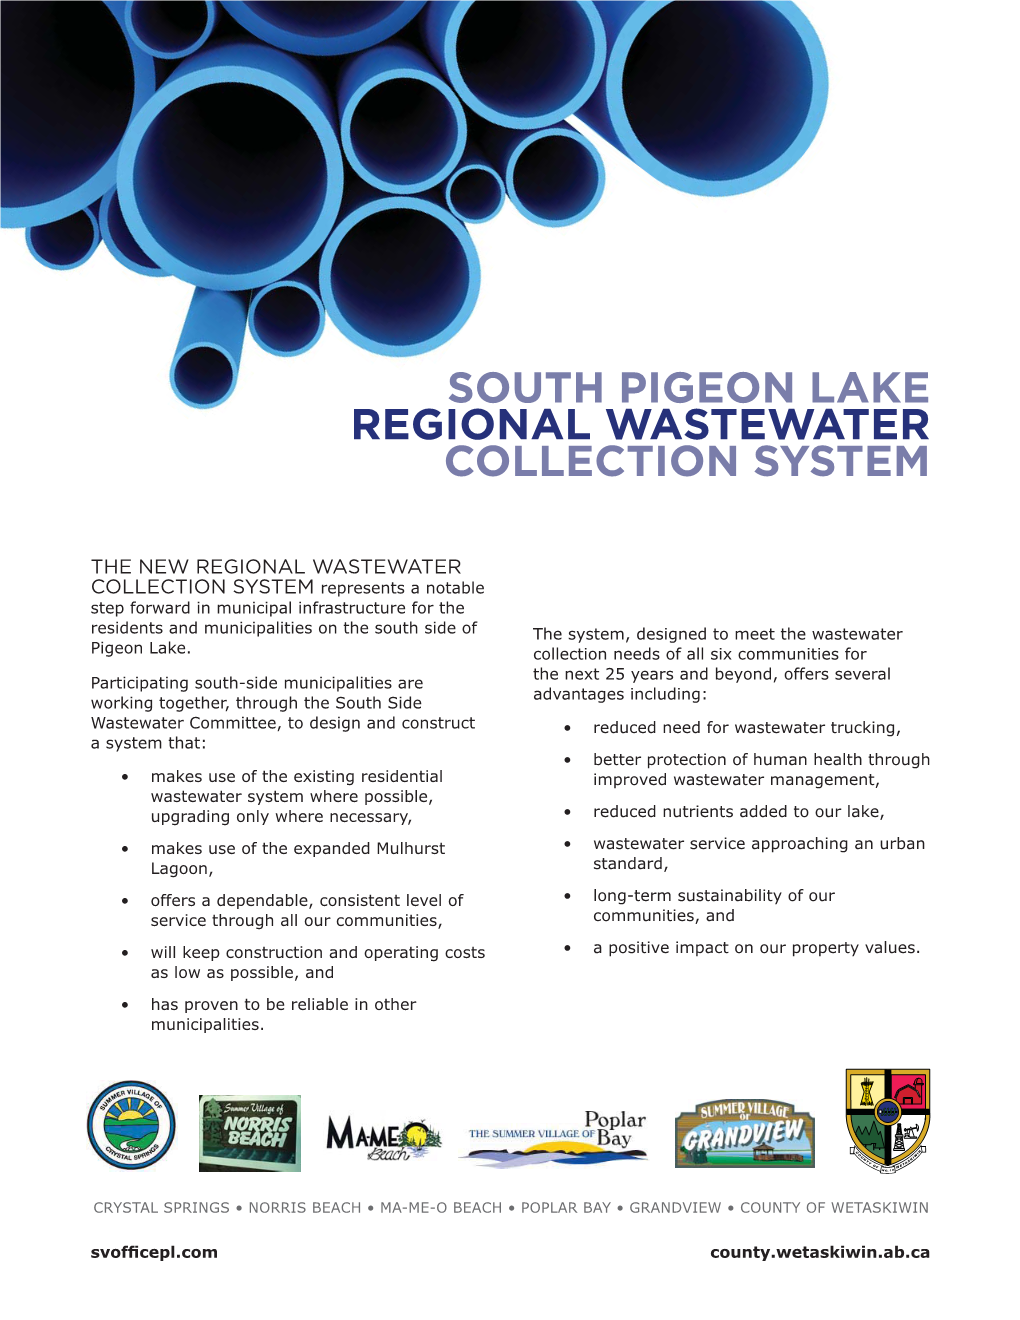 Regional Wastewater Collection System